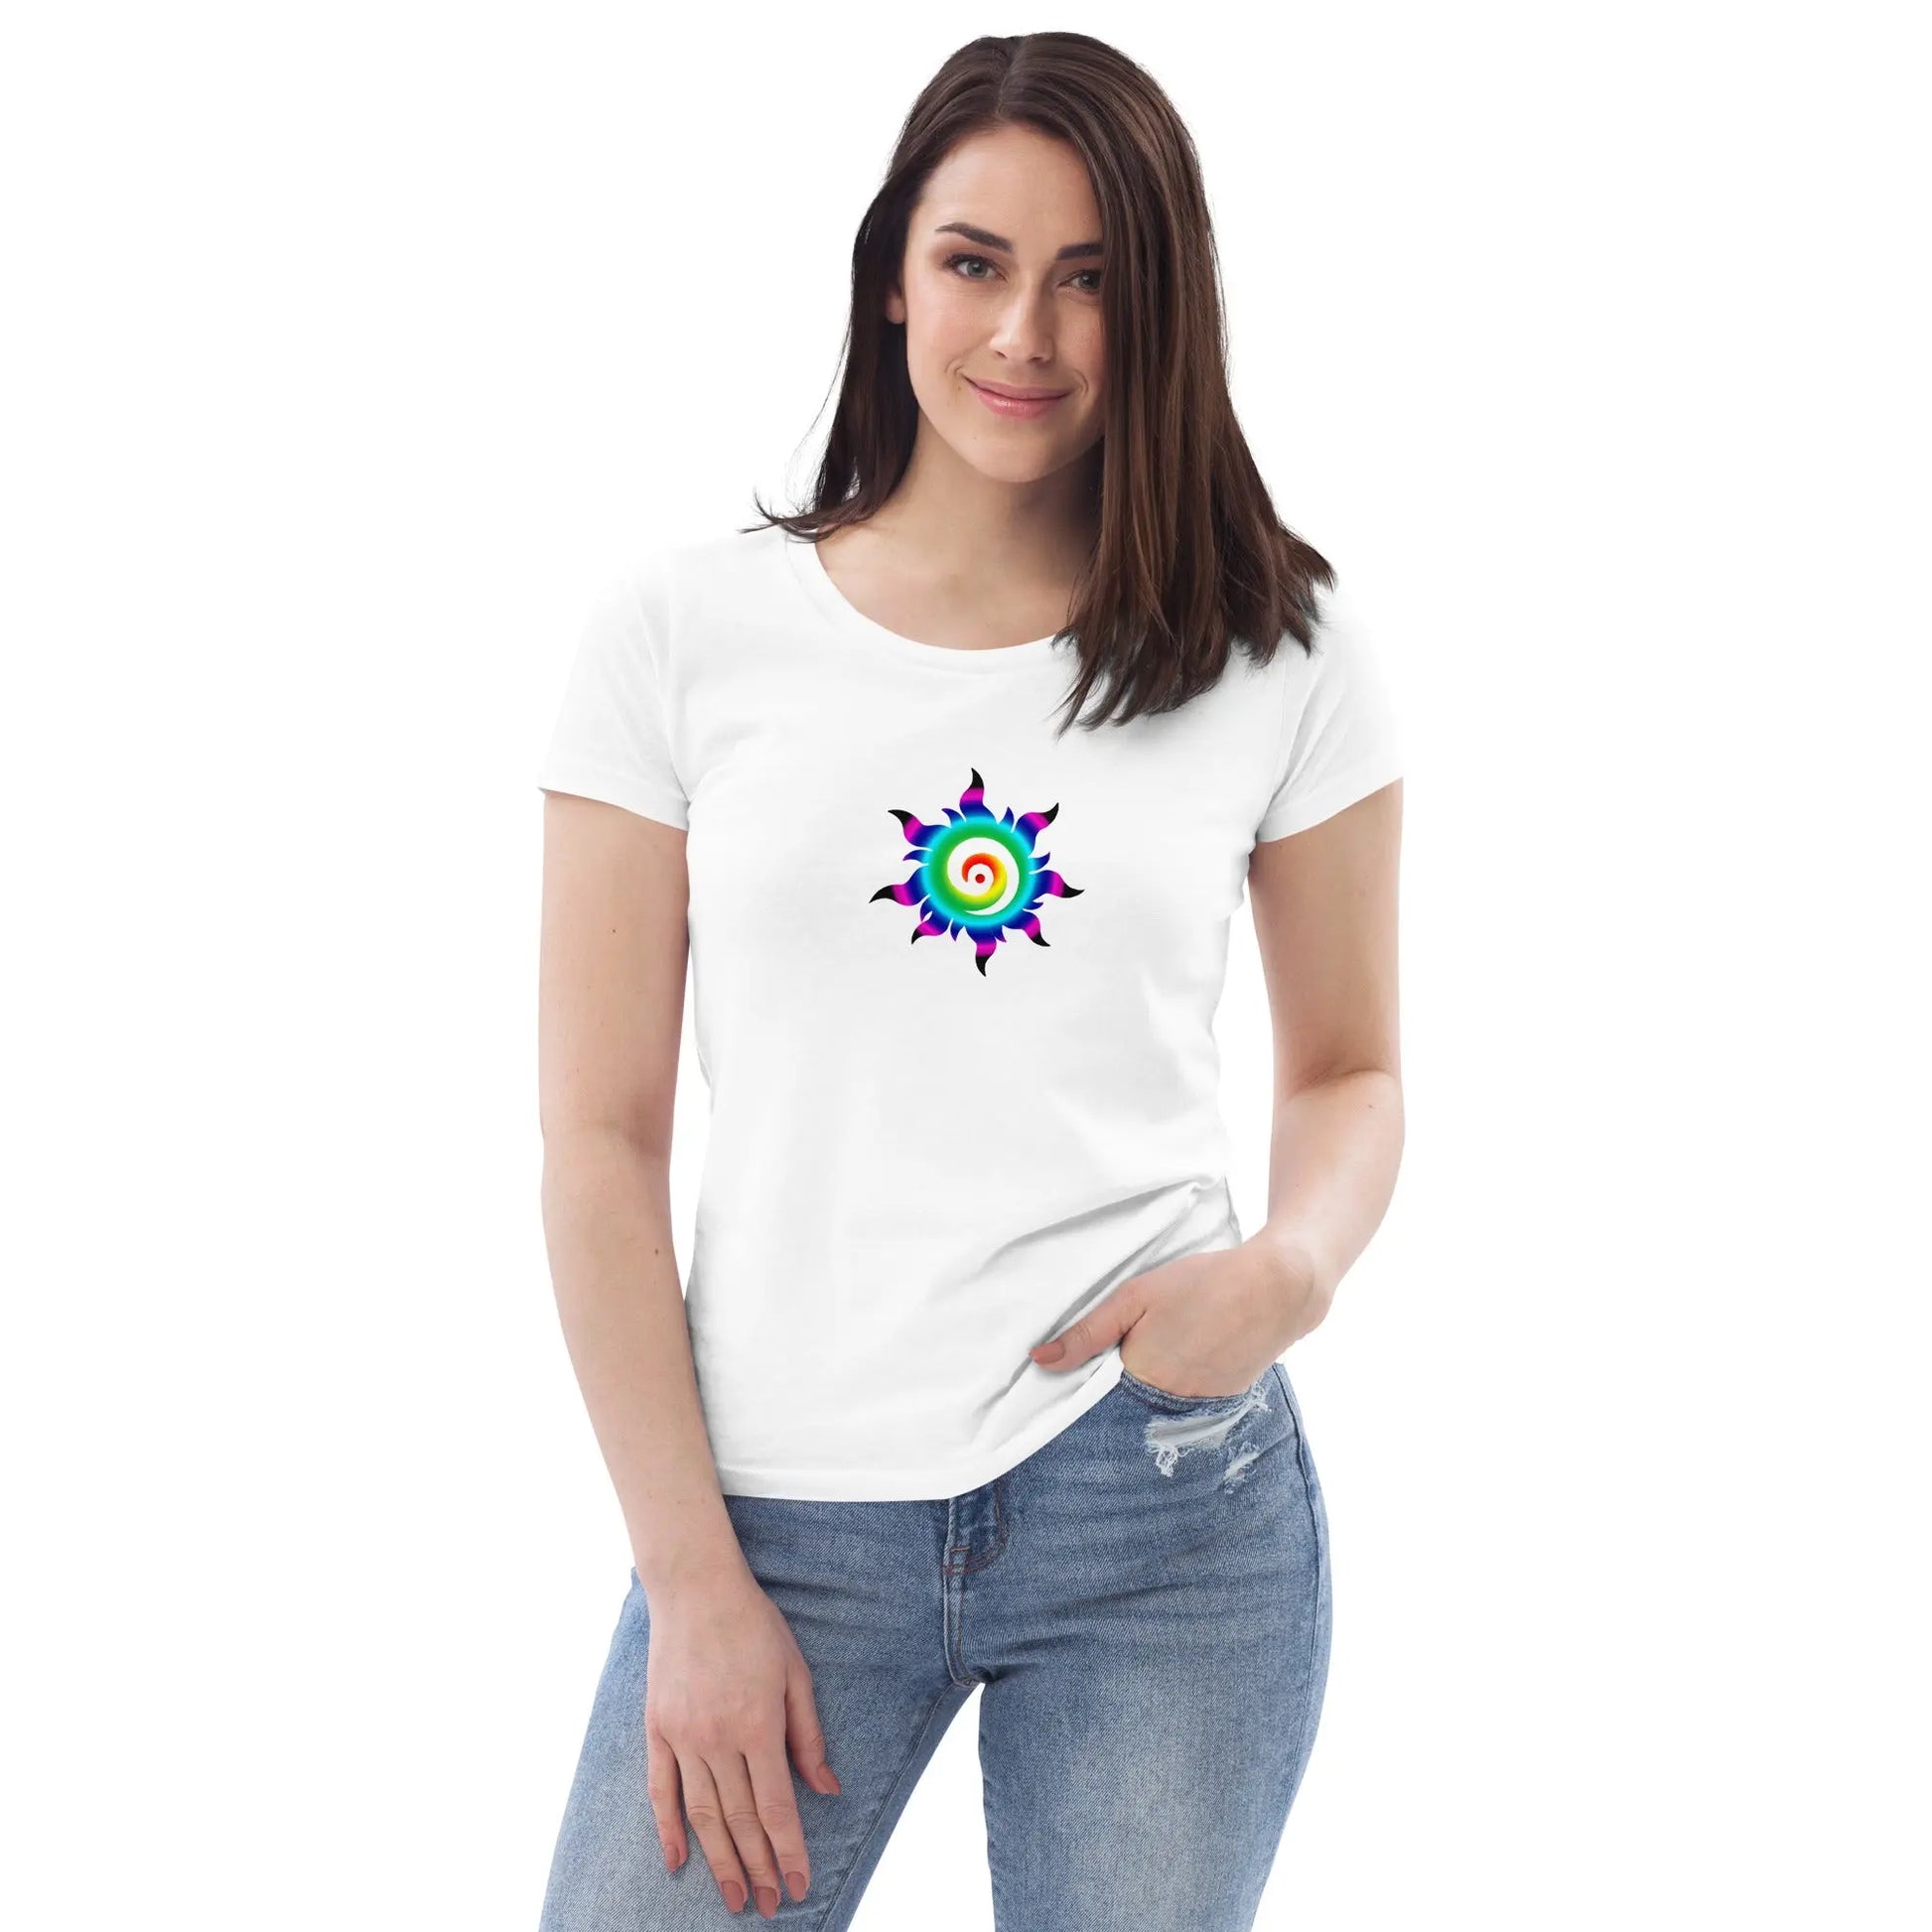 Women's fitted eco tee ActSunx - Image #21